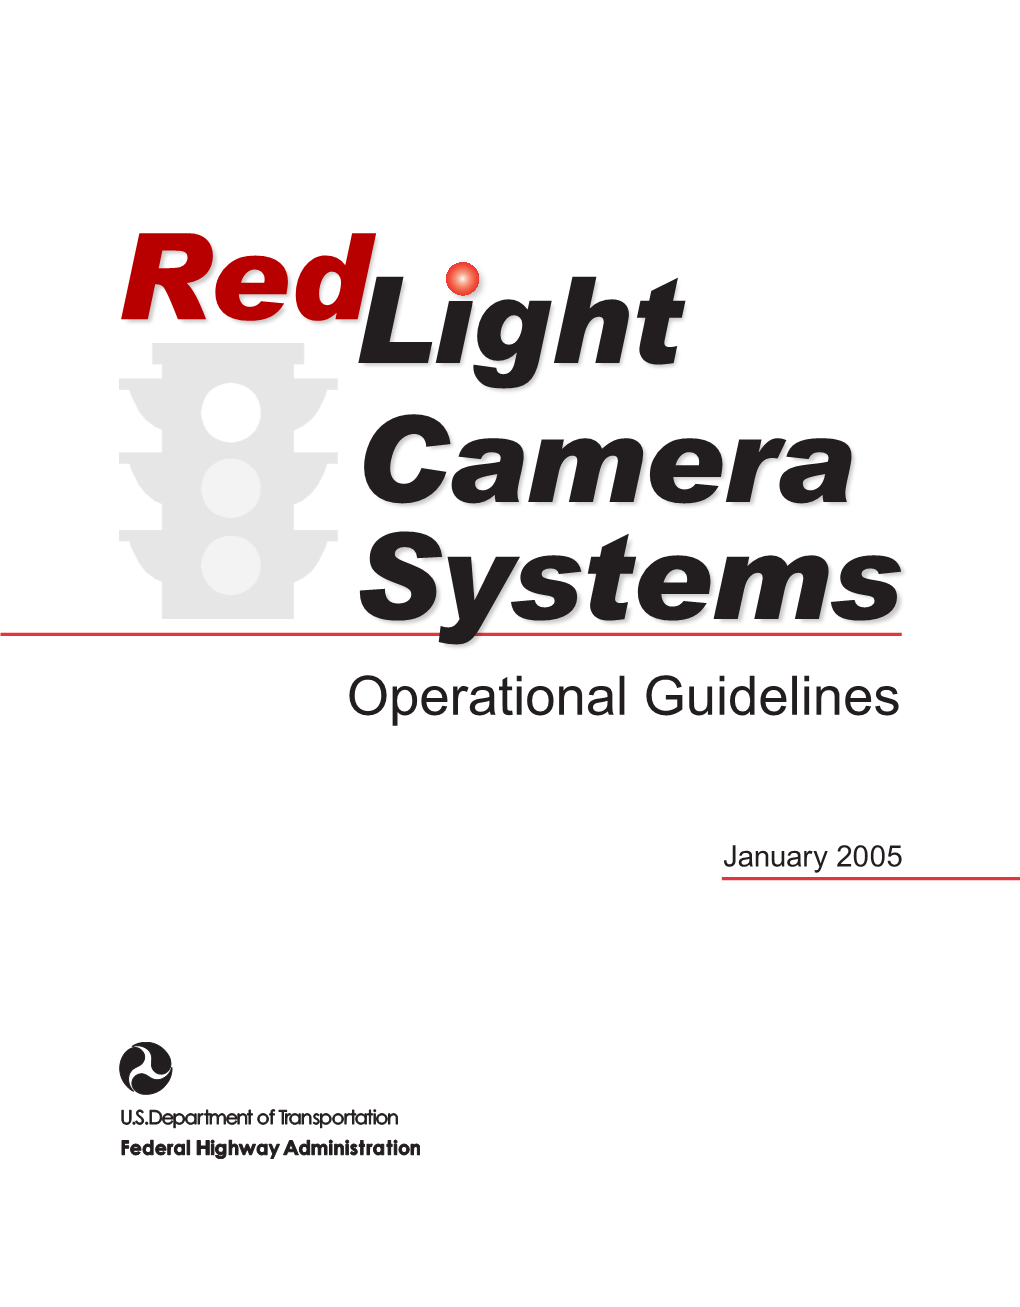 Red Light Camera Systems Operational Guidelines